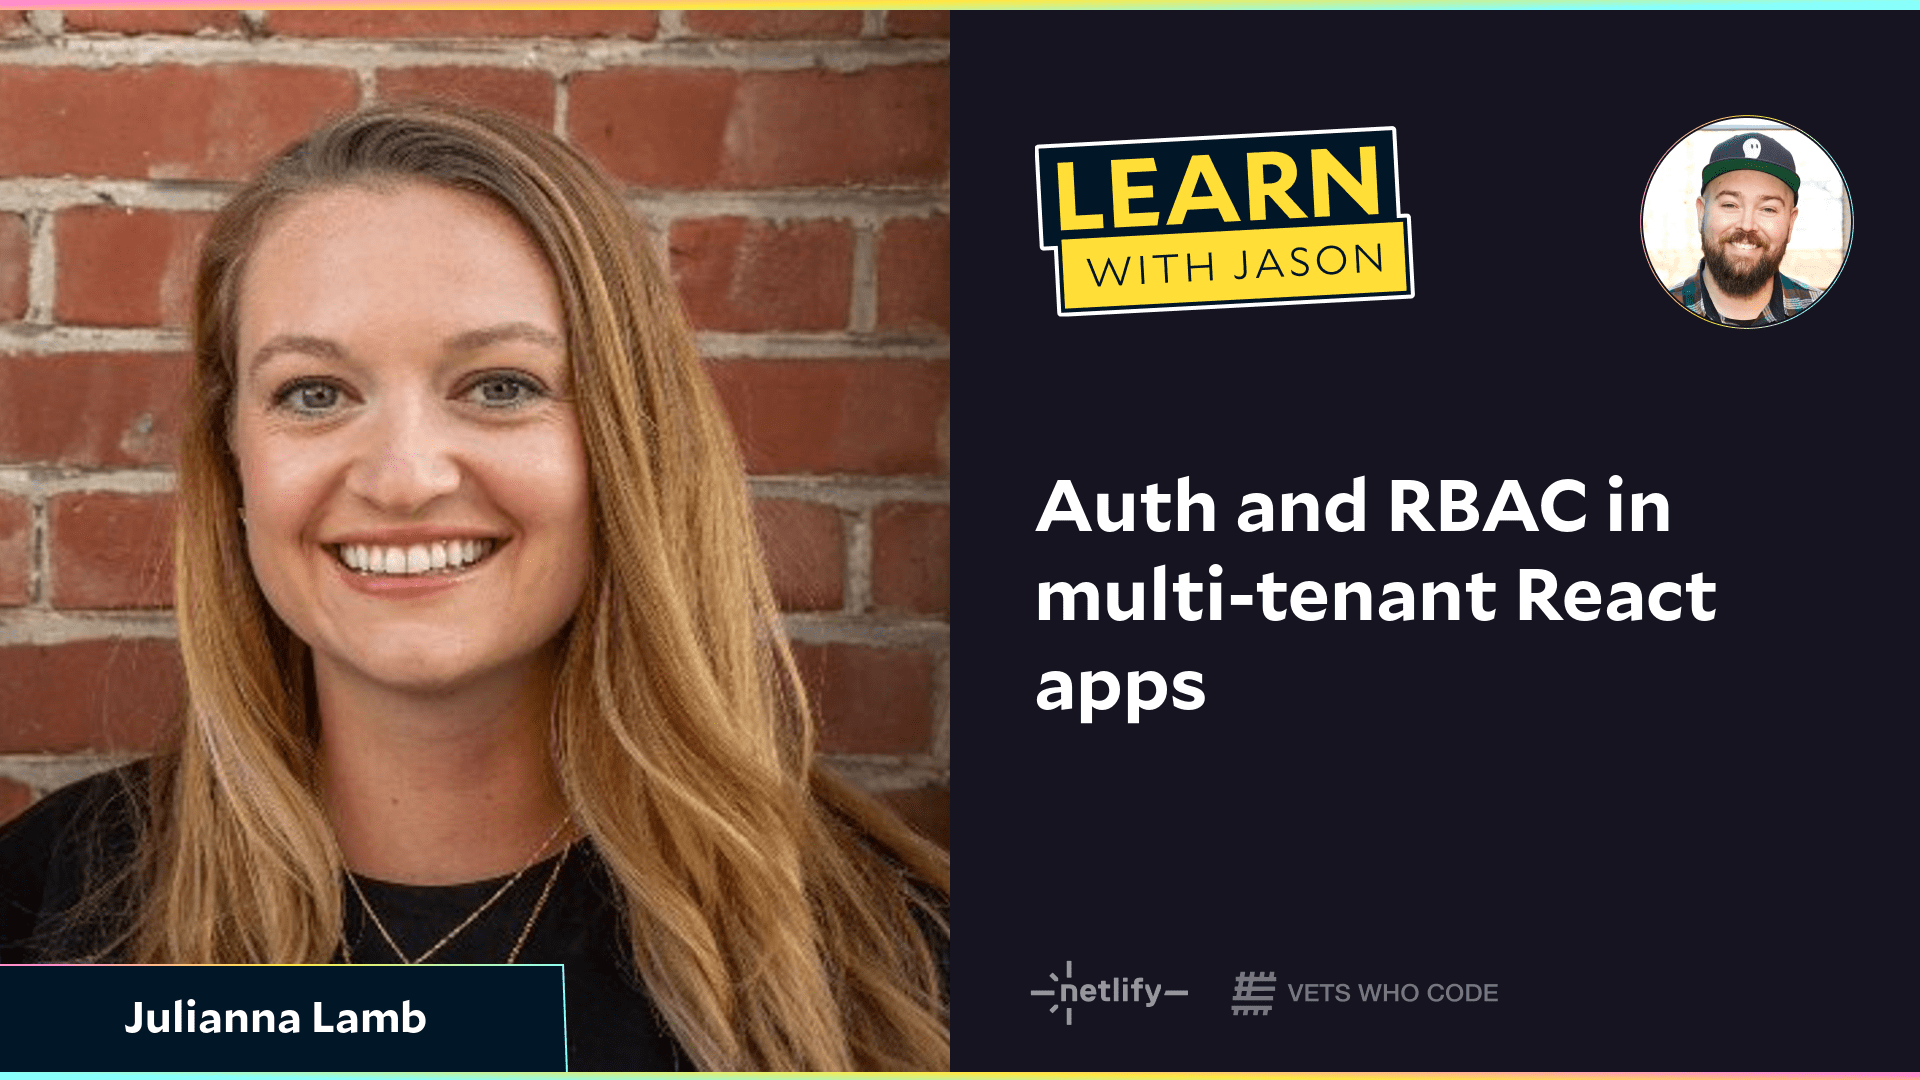 Auth and RBAC in multi-tenant React apps (with Julianna Lamb)